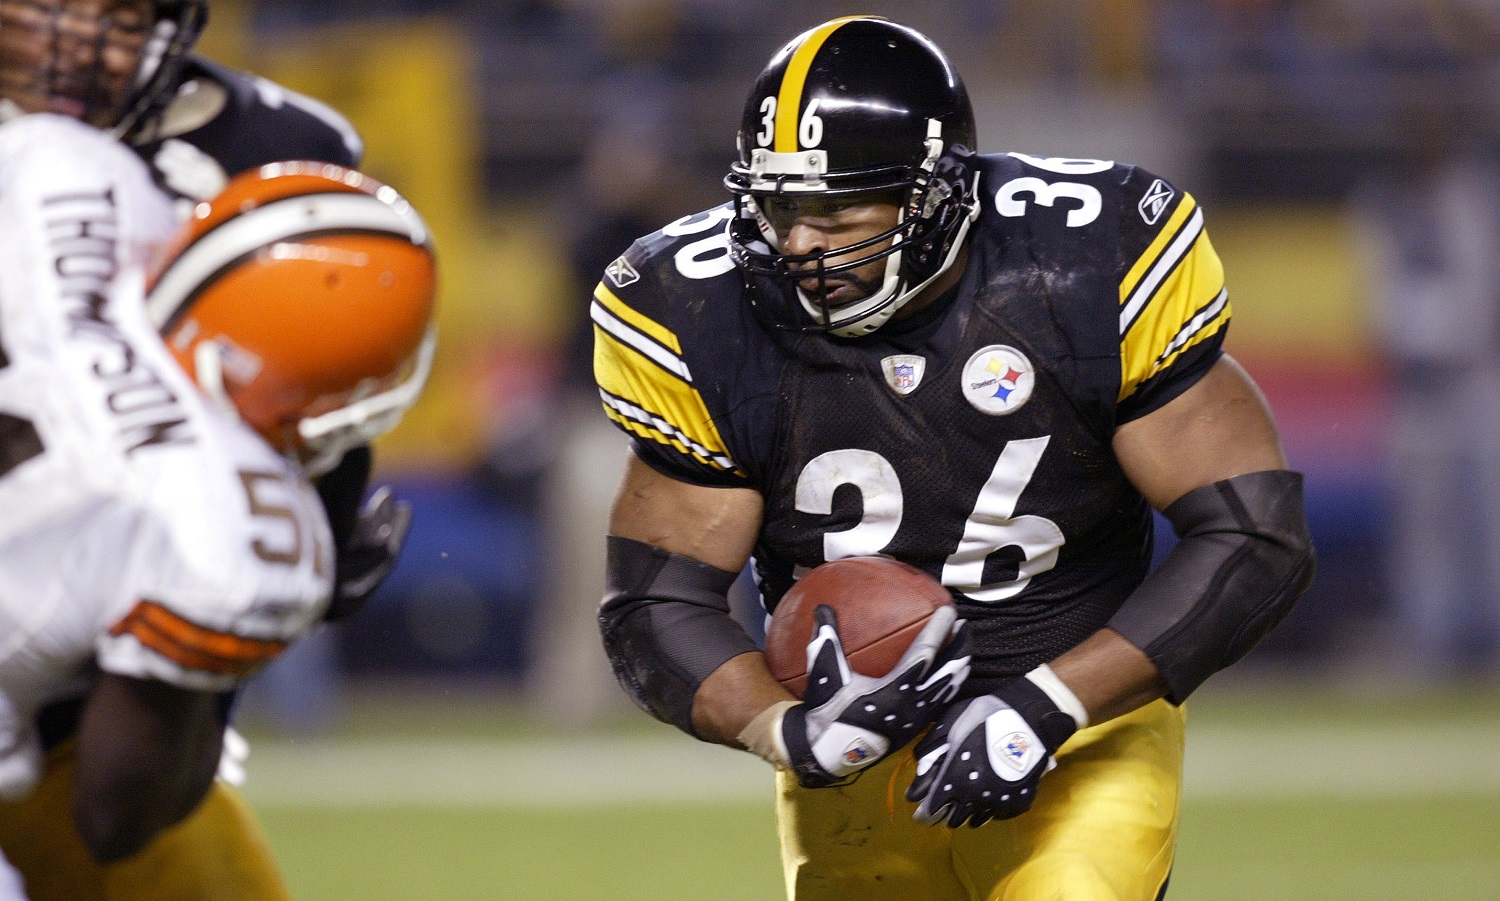 Pittsburgh Steelers Jerome Bettis runs in for a 1-yard score against the Cleveland Browns at Heinz Field in Pittsburgh on Nov. 13, 2005.